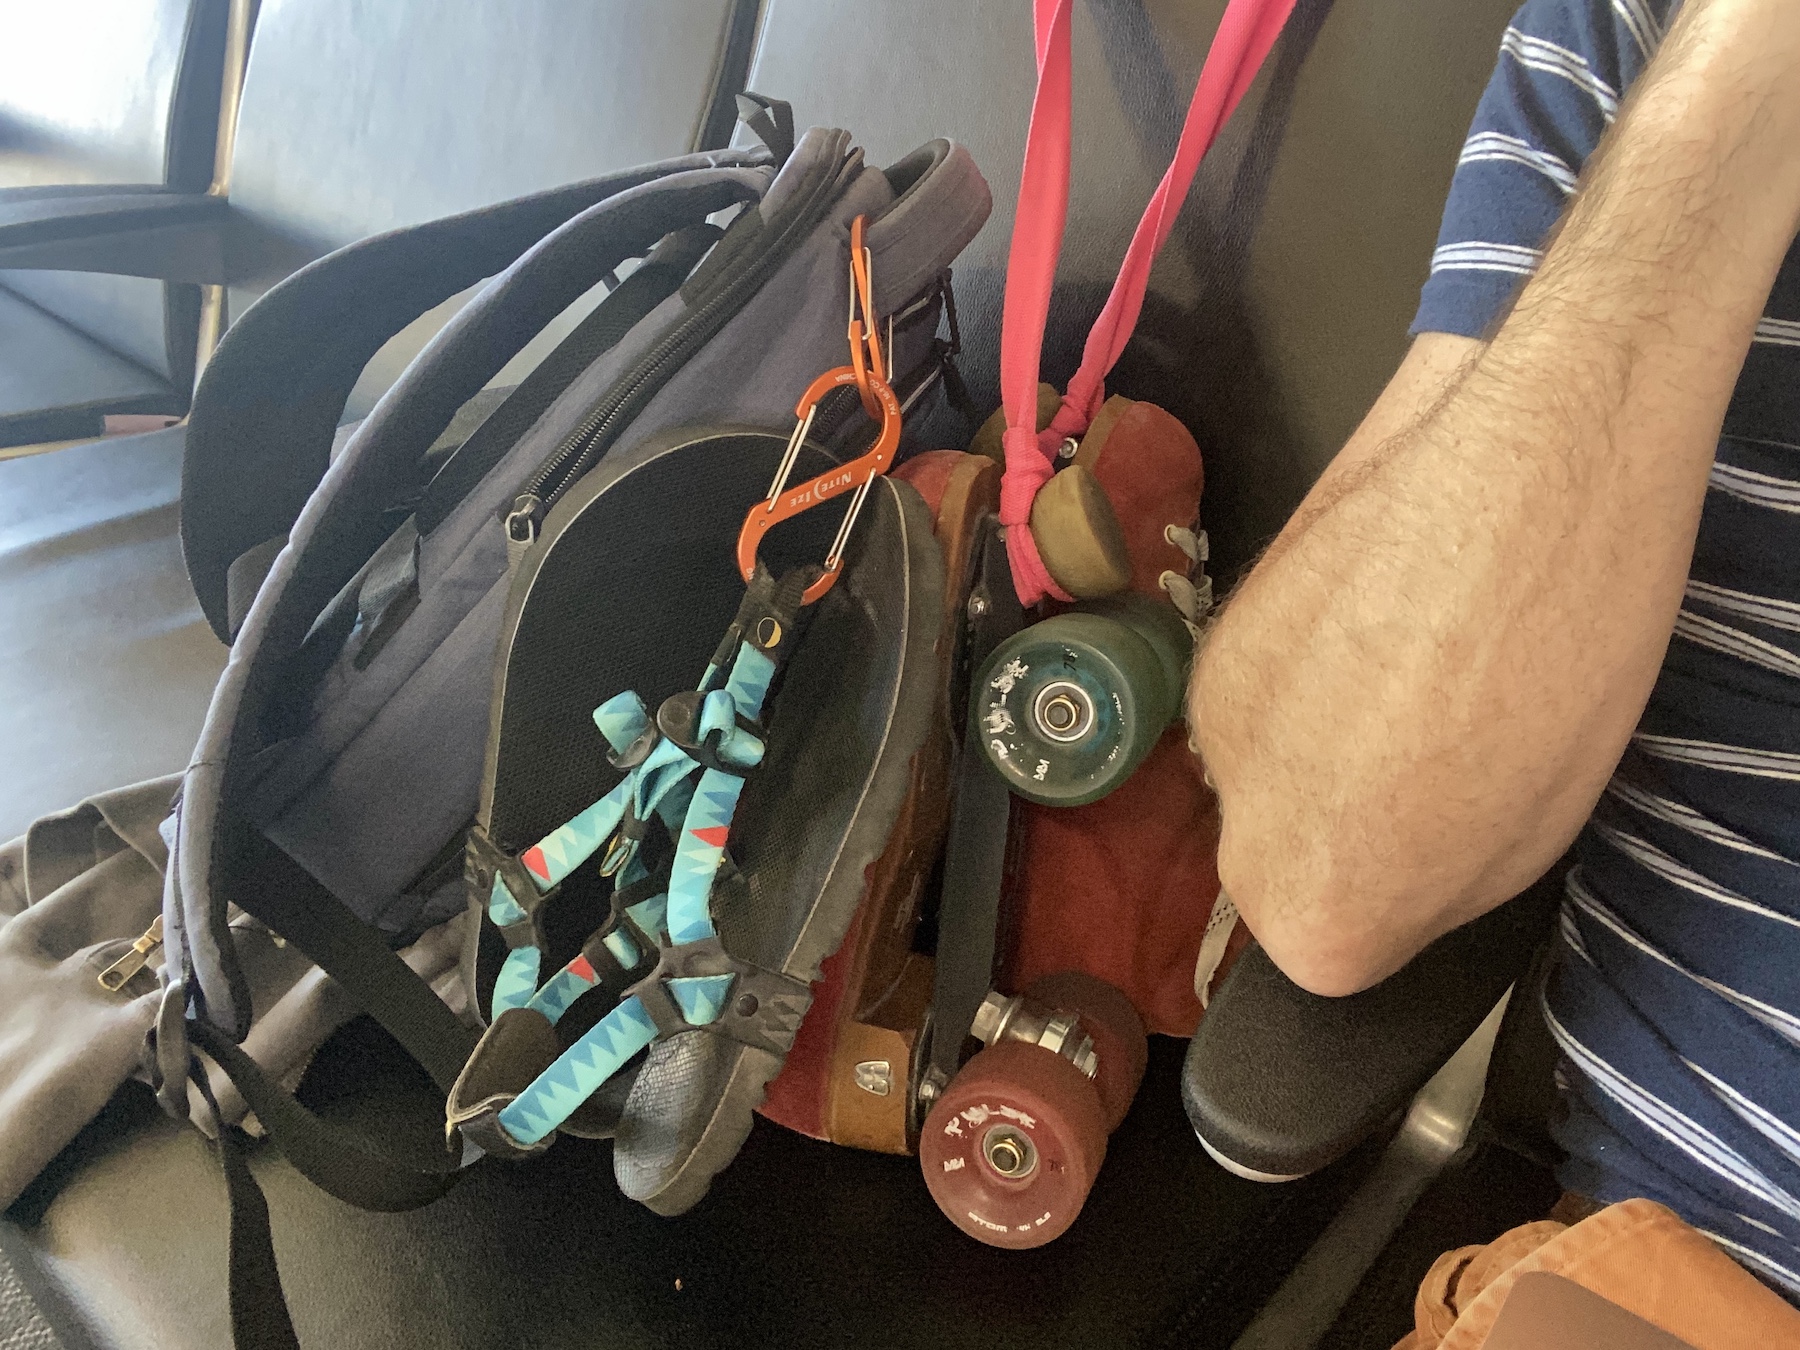 My carry-on luggage for the trip to Christchurch: backpack, sandals, and roller skates